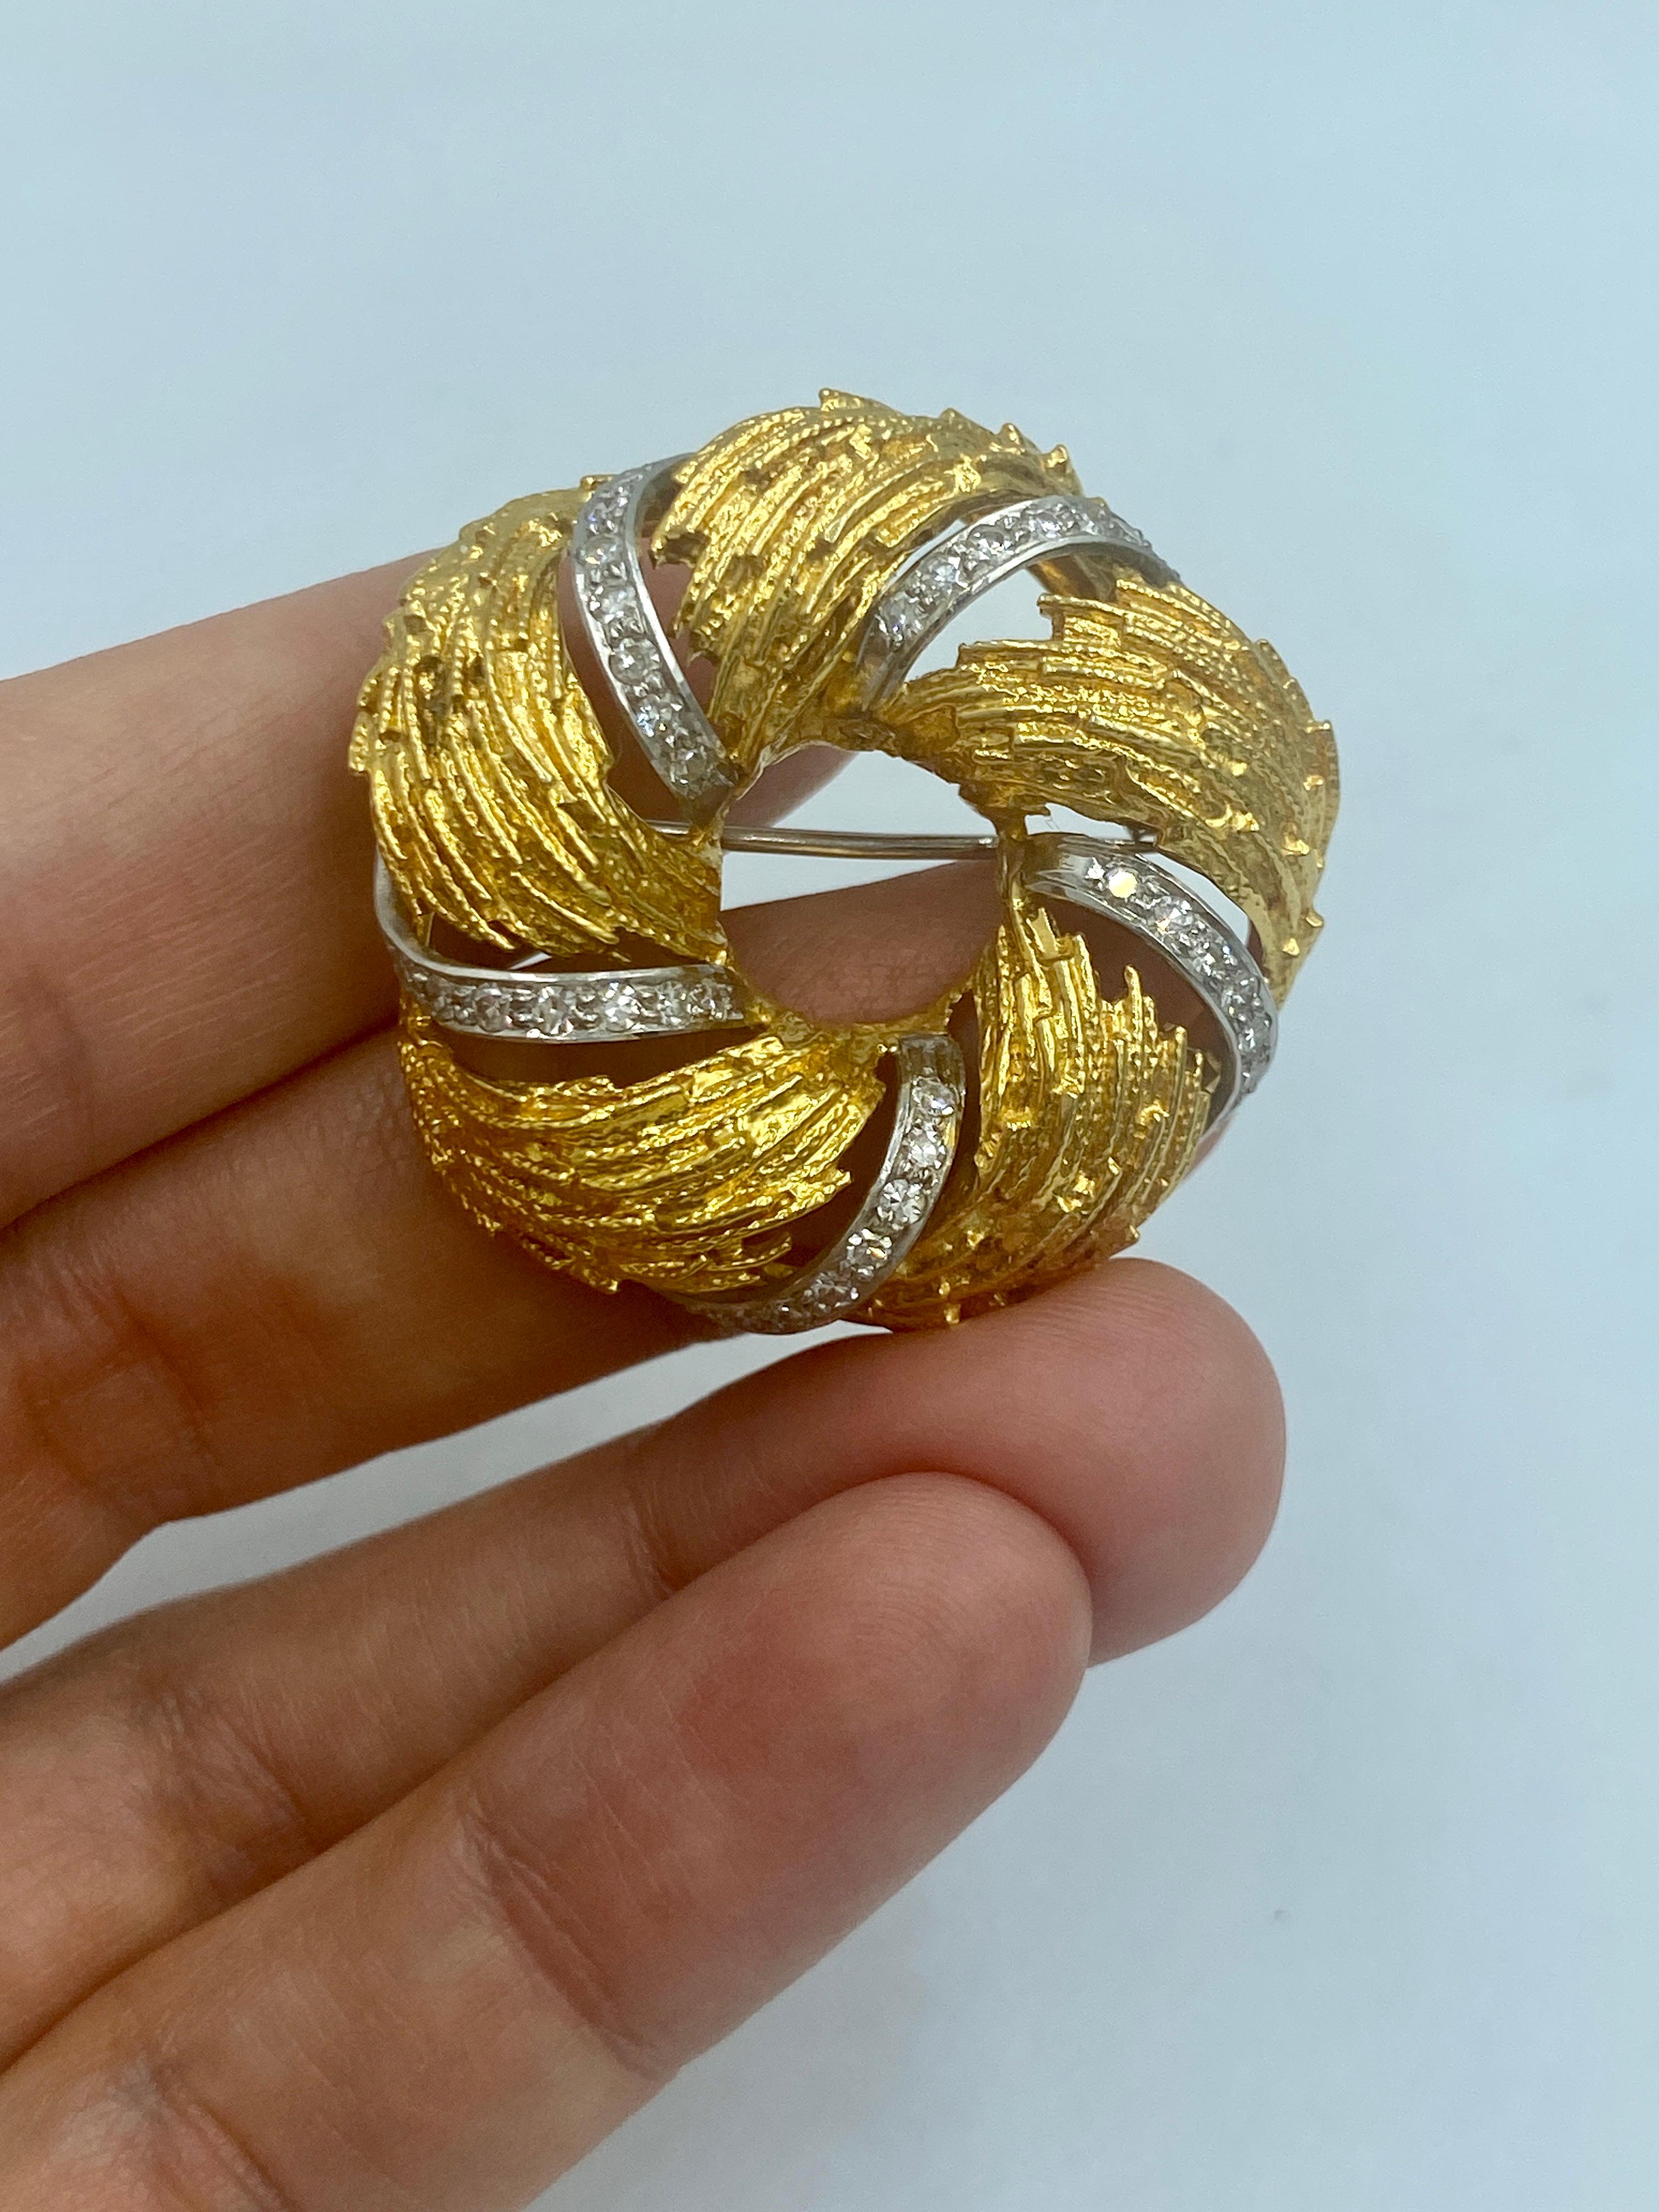 A charming 18k gold brooch made in Europe in 1960s in the shape of a wreath. It is the perfect size to pin on a lapel or collar, delicately adorned with approximately 0.5 carats of round cut diamonds.